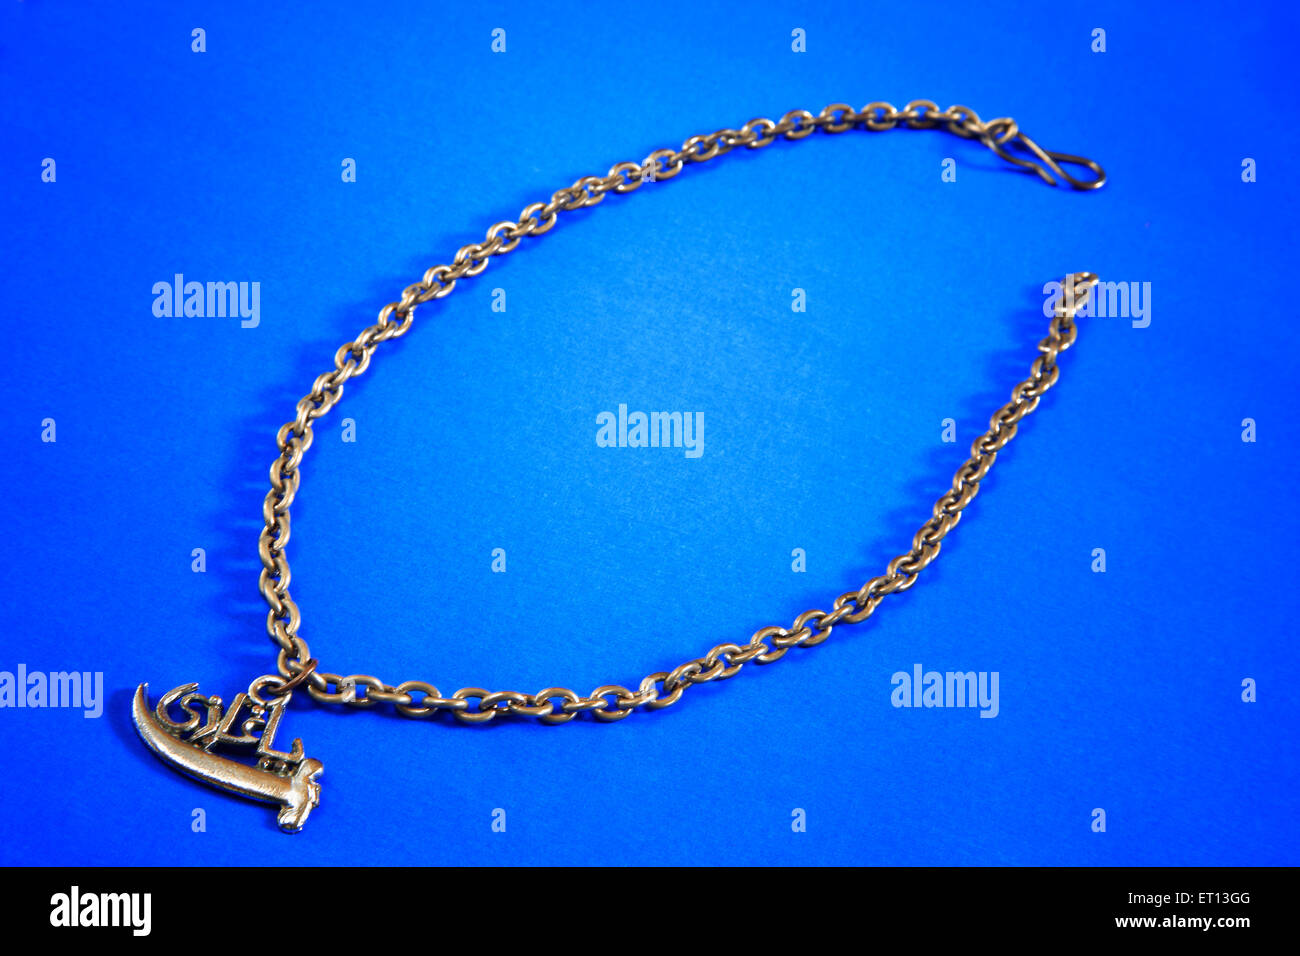 Necklace with metal charm amulet pendant on blue background Stock Photo